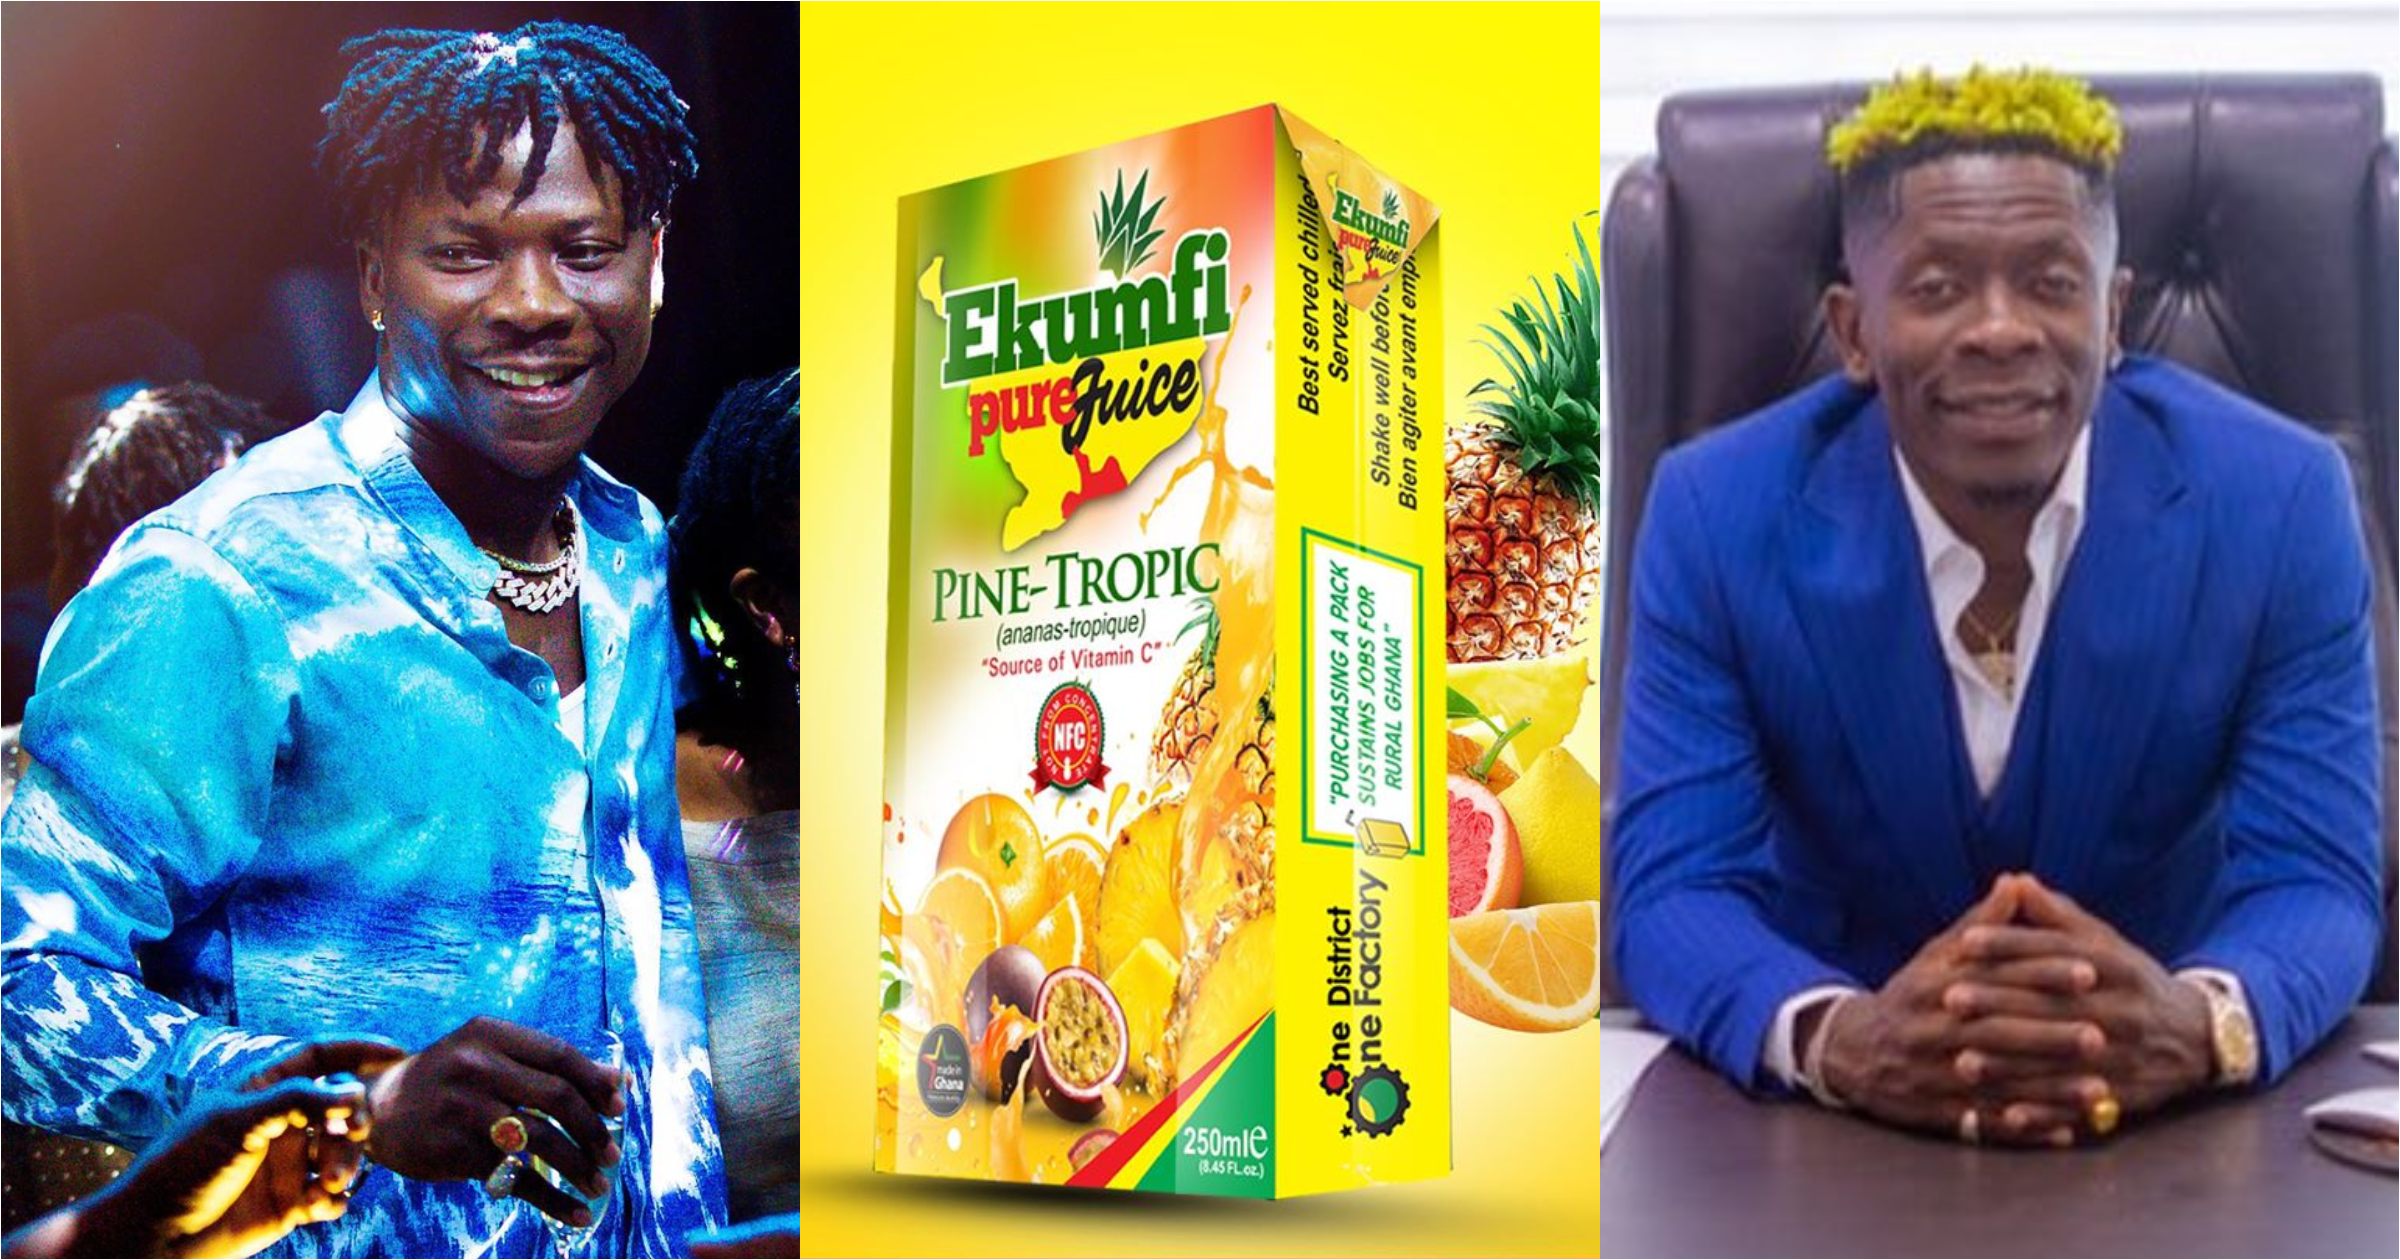 Shatta Wale and Stonebwoy promote Ekumfi Juice as they hang out in new video